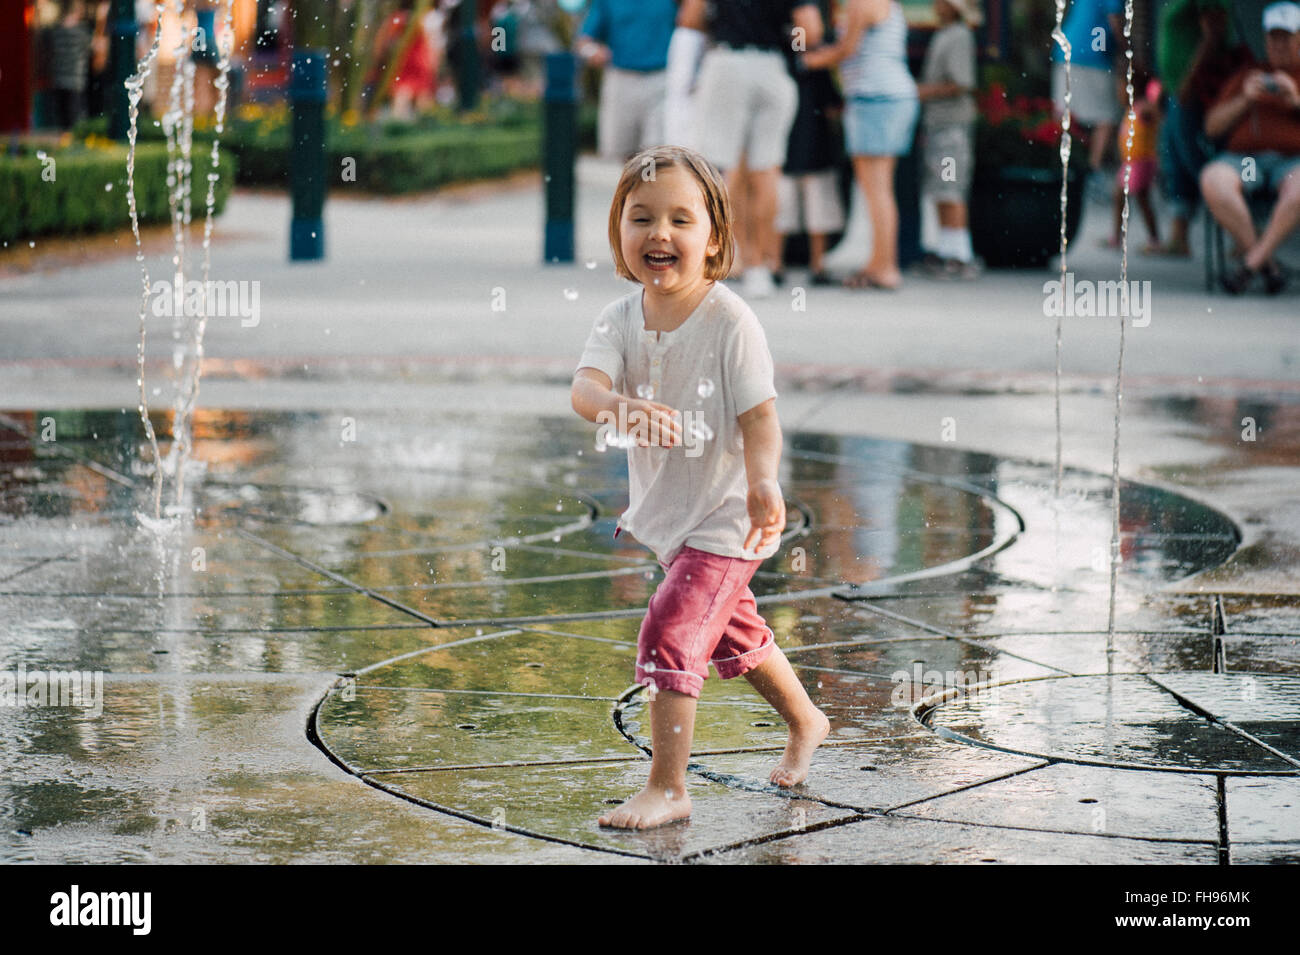 Young kids having fun playing with water fountains at the amusement park of Disney World in Florida US at the beginning of summer. Stock Photo